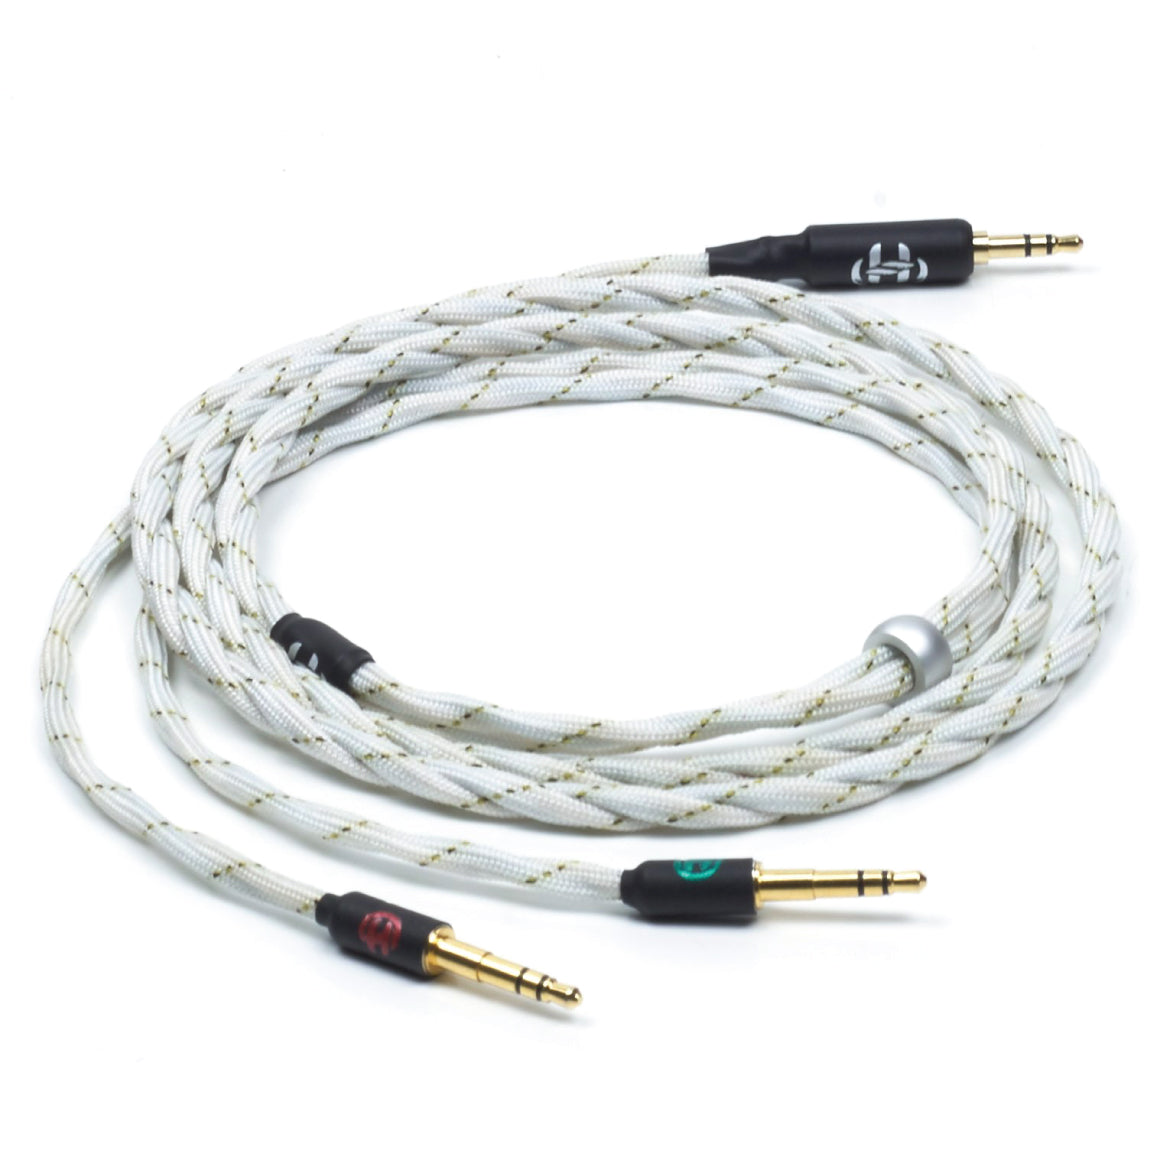 Headphone-Zone-Headgear Audio - Upgrade Cable for Beyerdynamic T1 2nd Generation / T5p Second Generation/ Sleeved - 4.4mm TRRRS Balanced For Sony